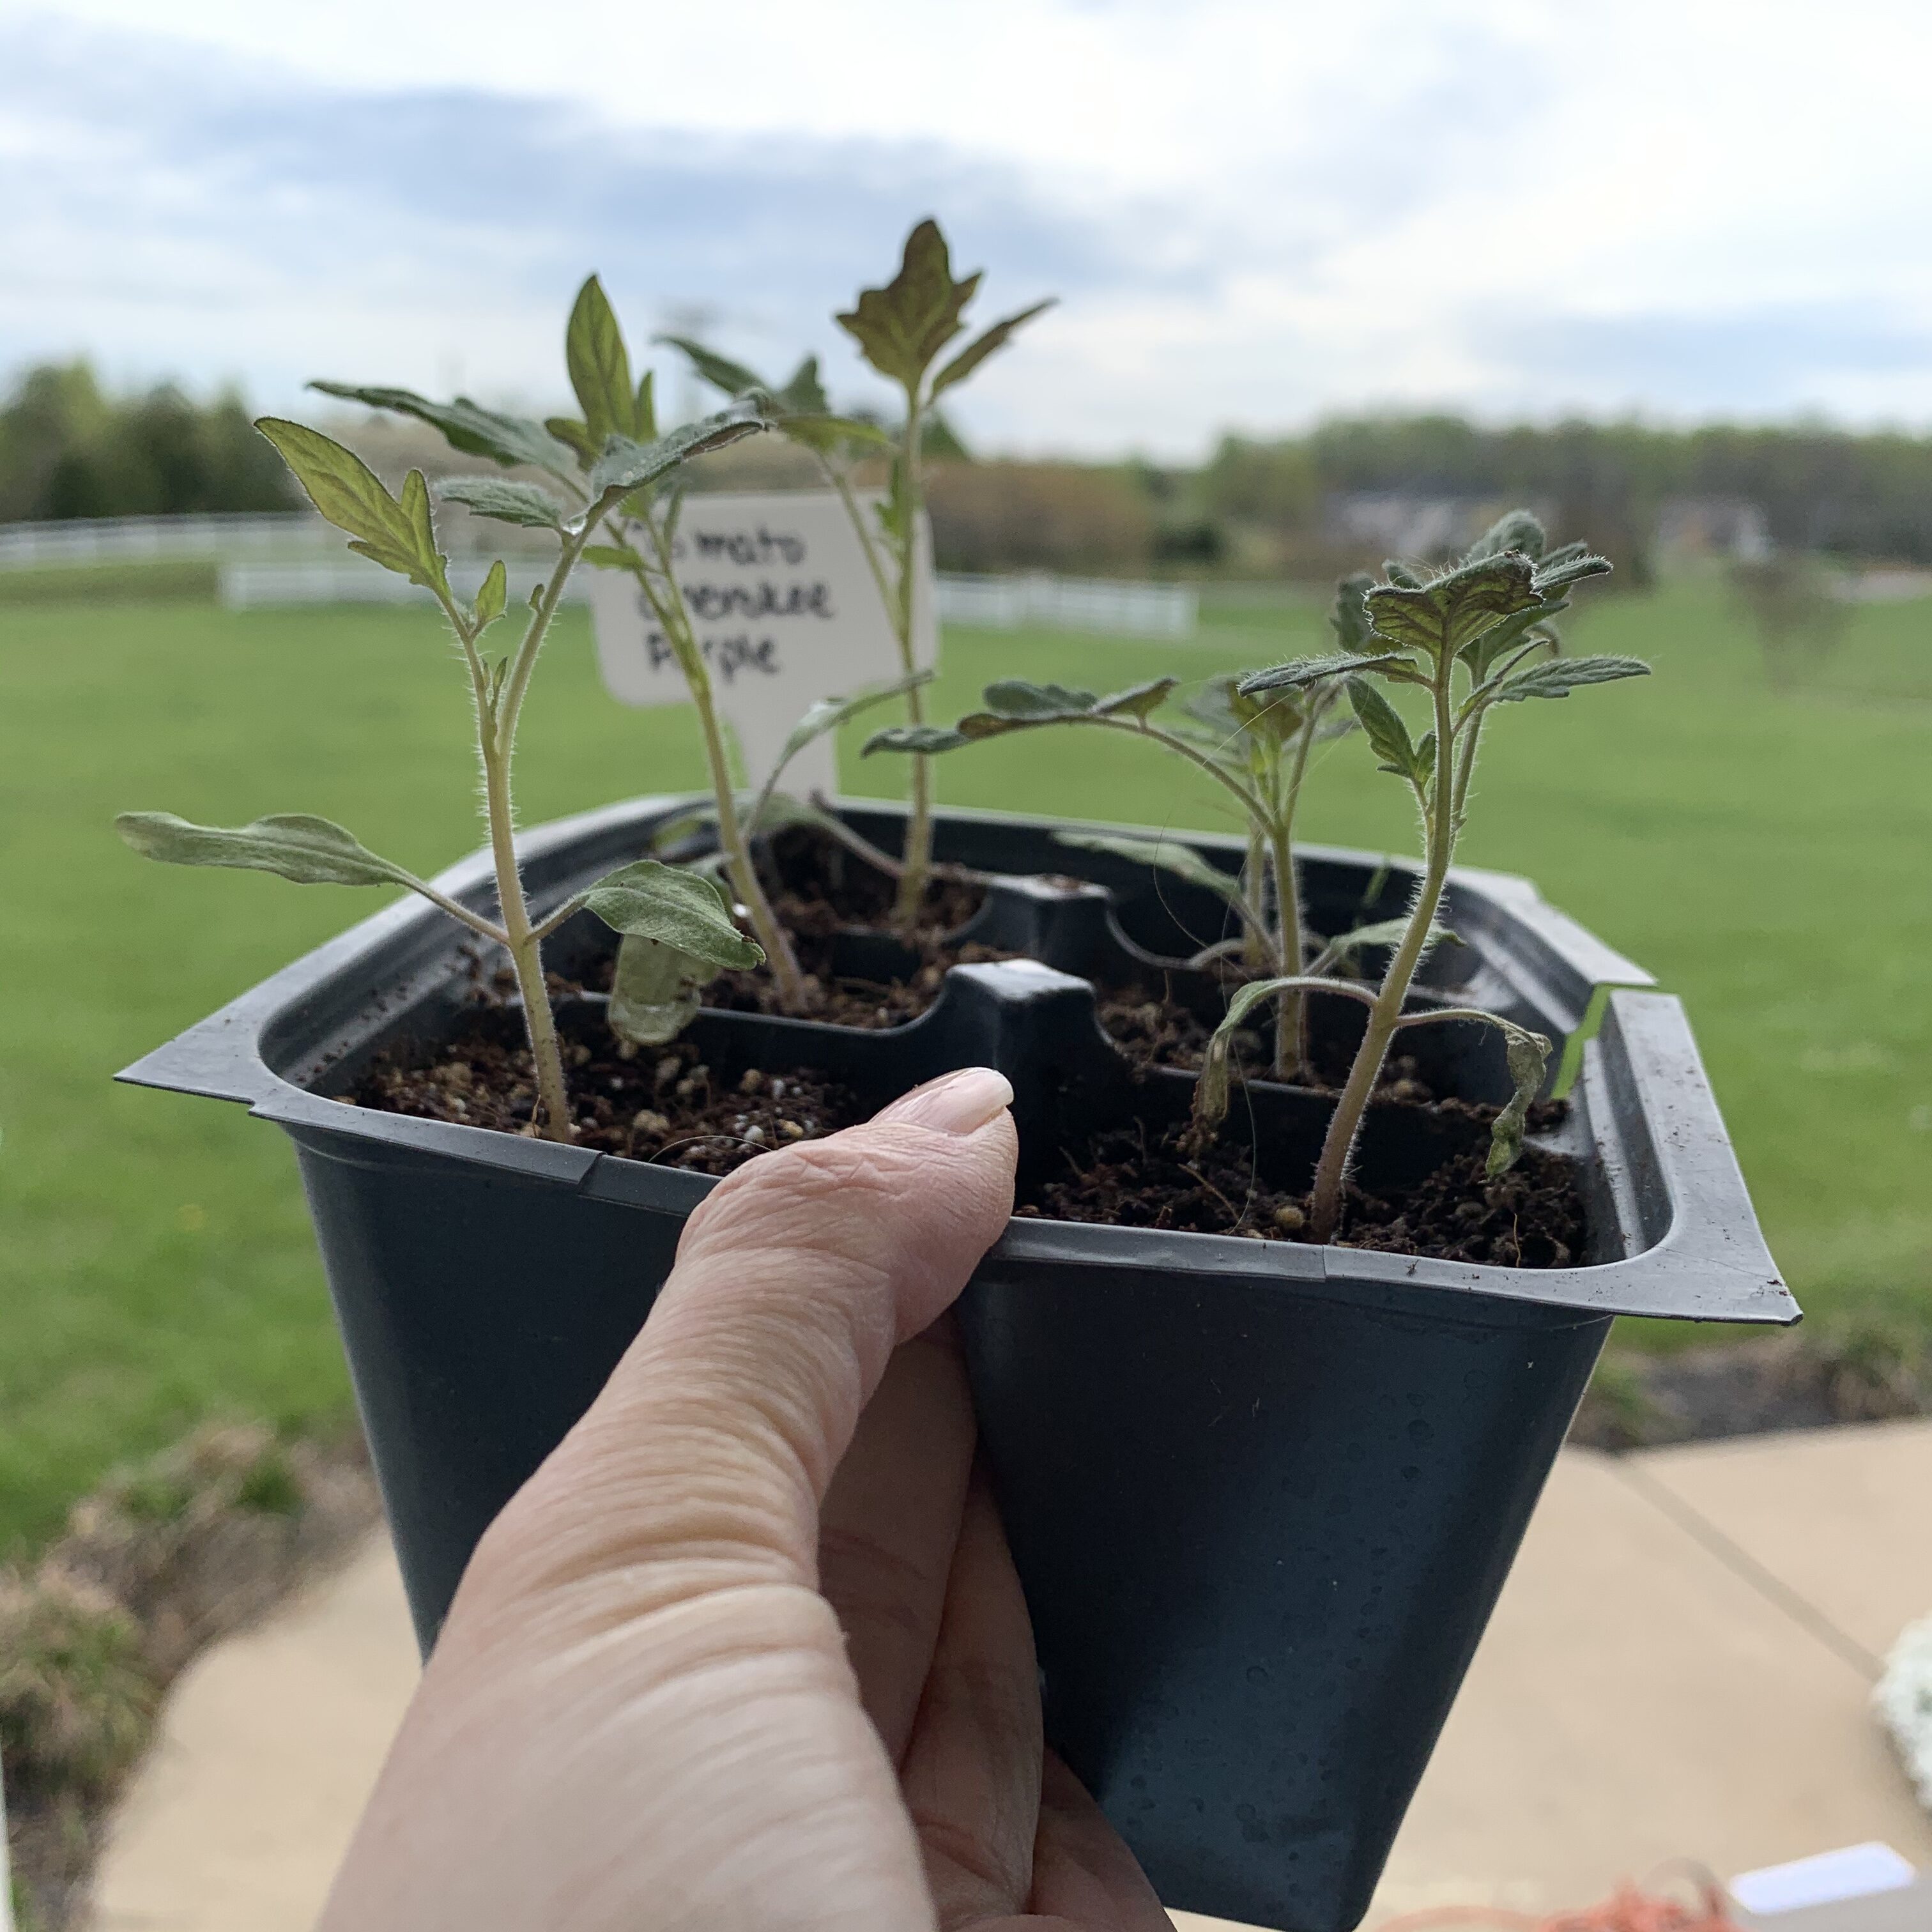 F08D5922 4336 4DBB B20A 2B118A1BF86A Comparing Burpee Organic Seed Starting Mix vs Miracle Gro Moisture Control Potting Mix for transplanted tomato seedlings - Results